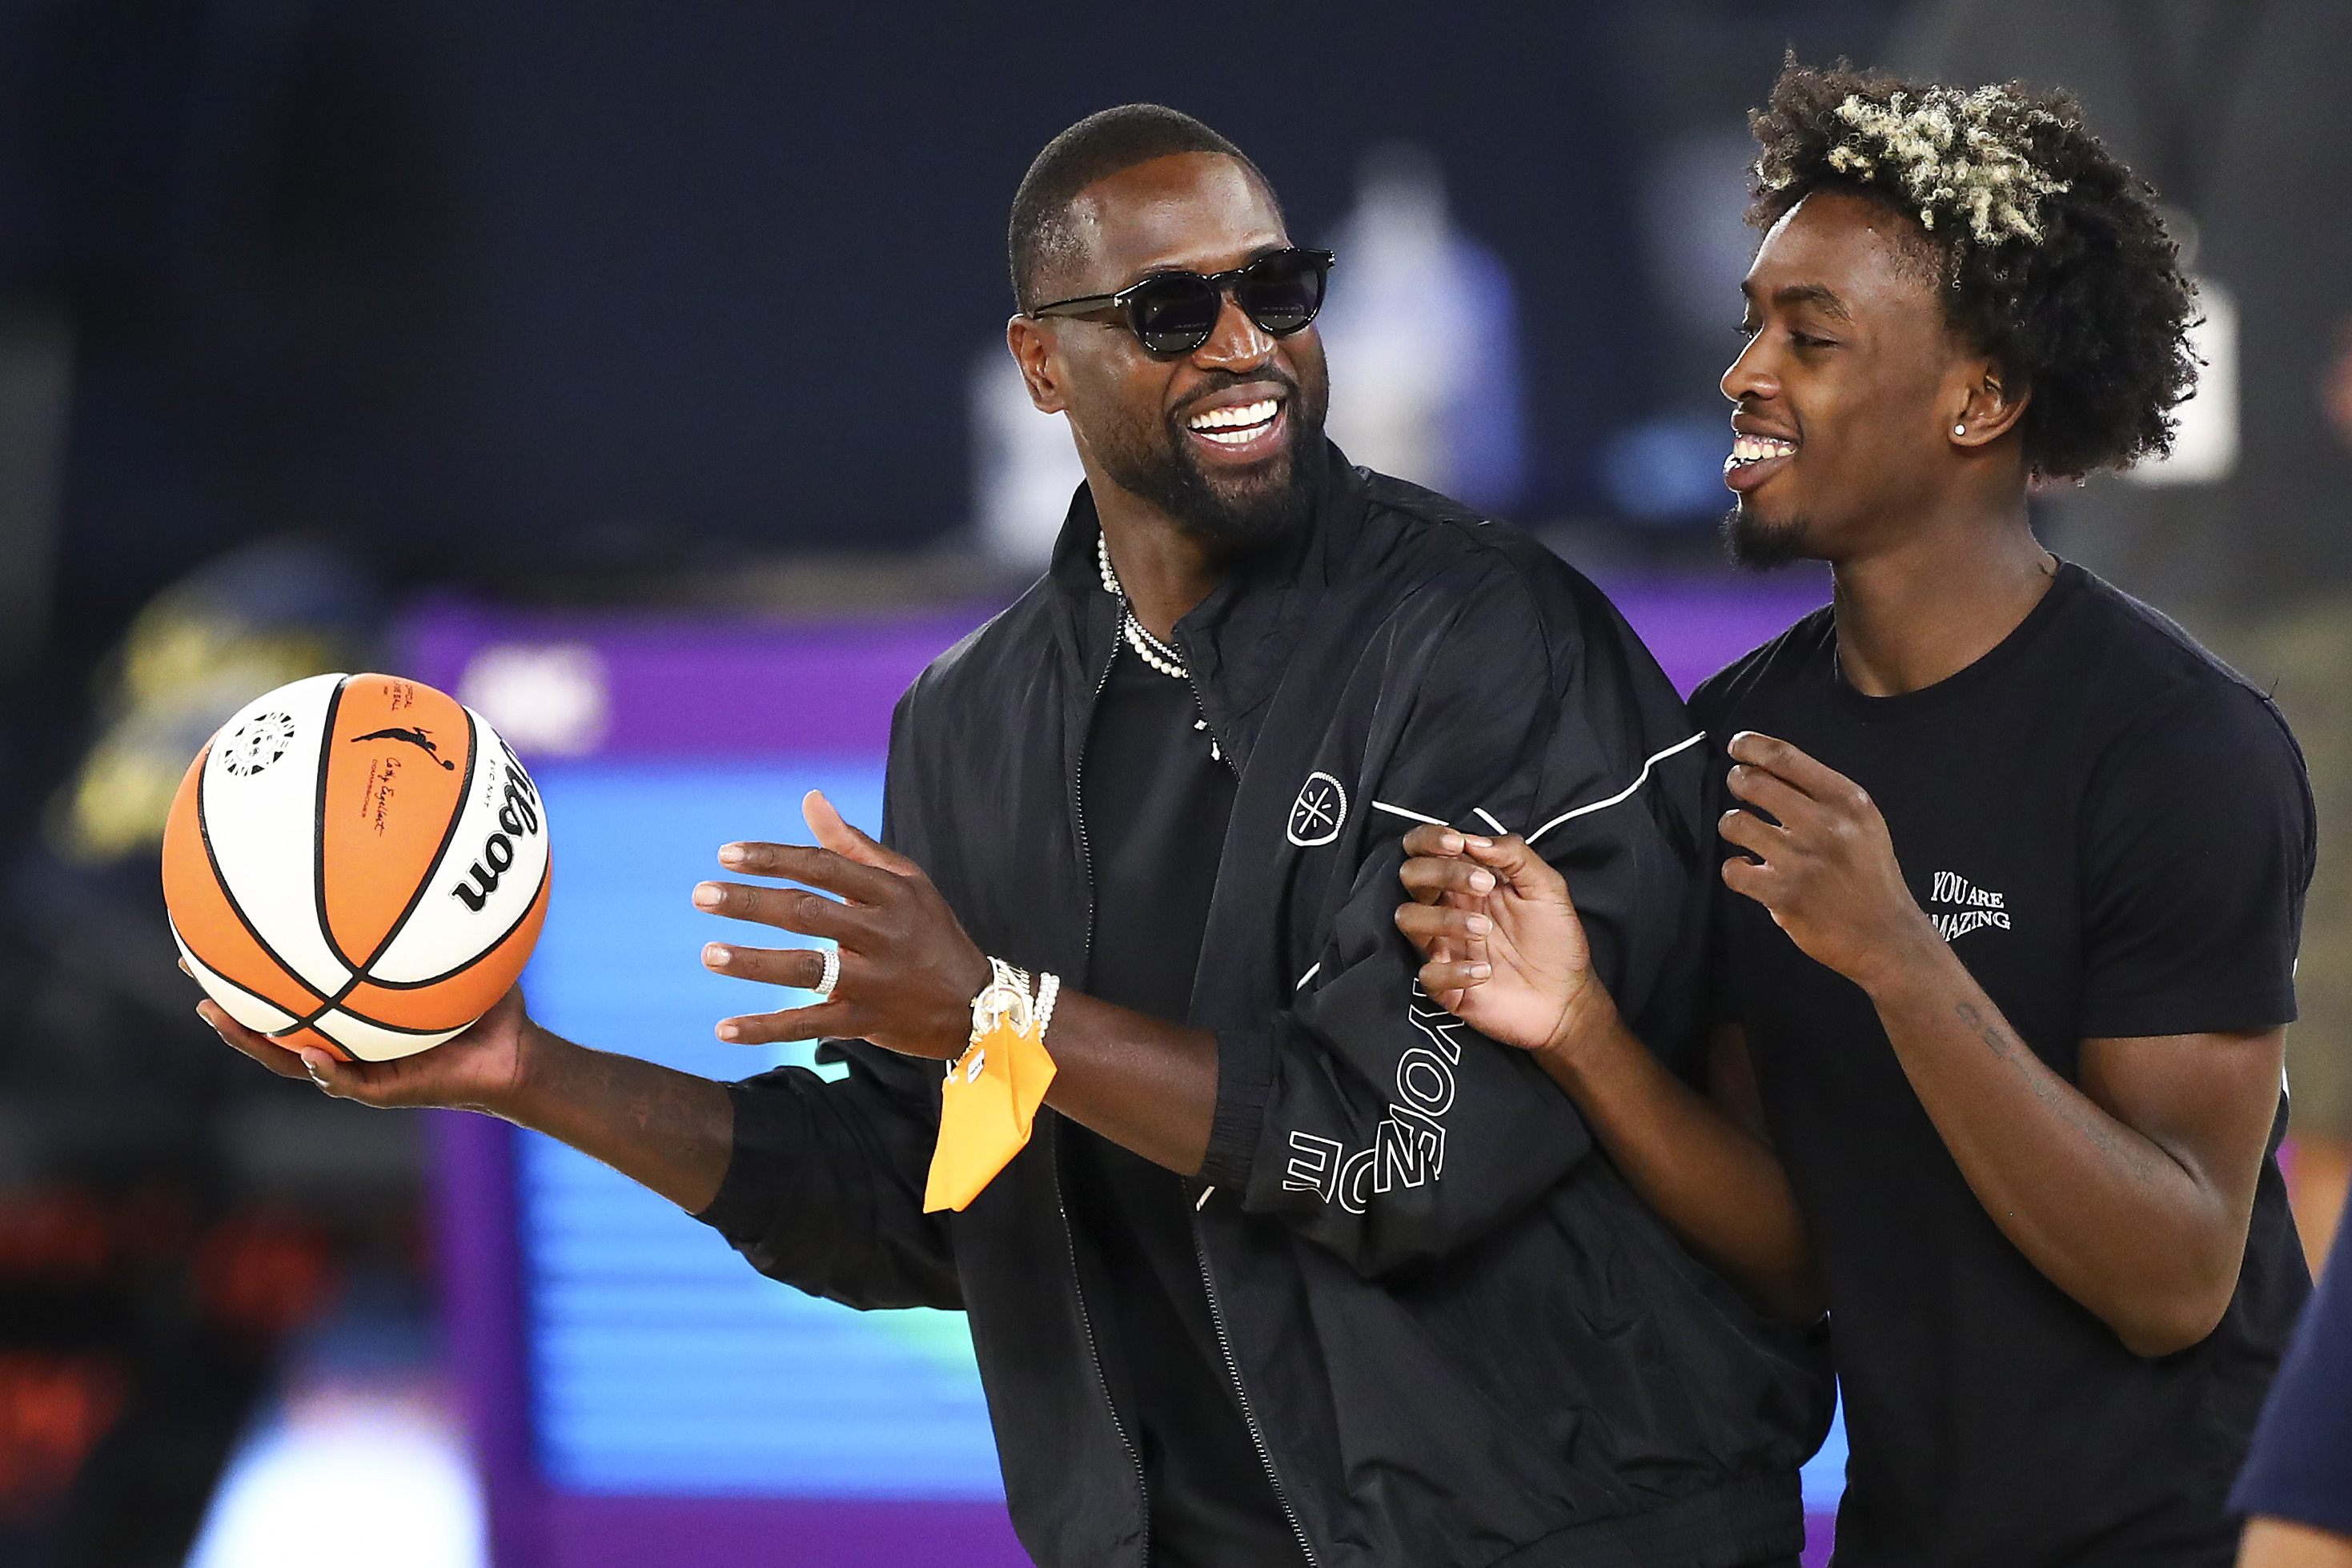 Former Miami Heat star and Utah Jazz part-owner Dwyane Wade at a WNBA game with his son, Zaire